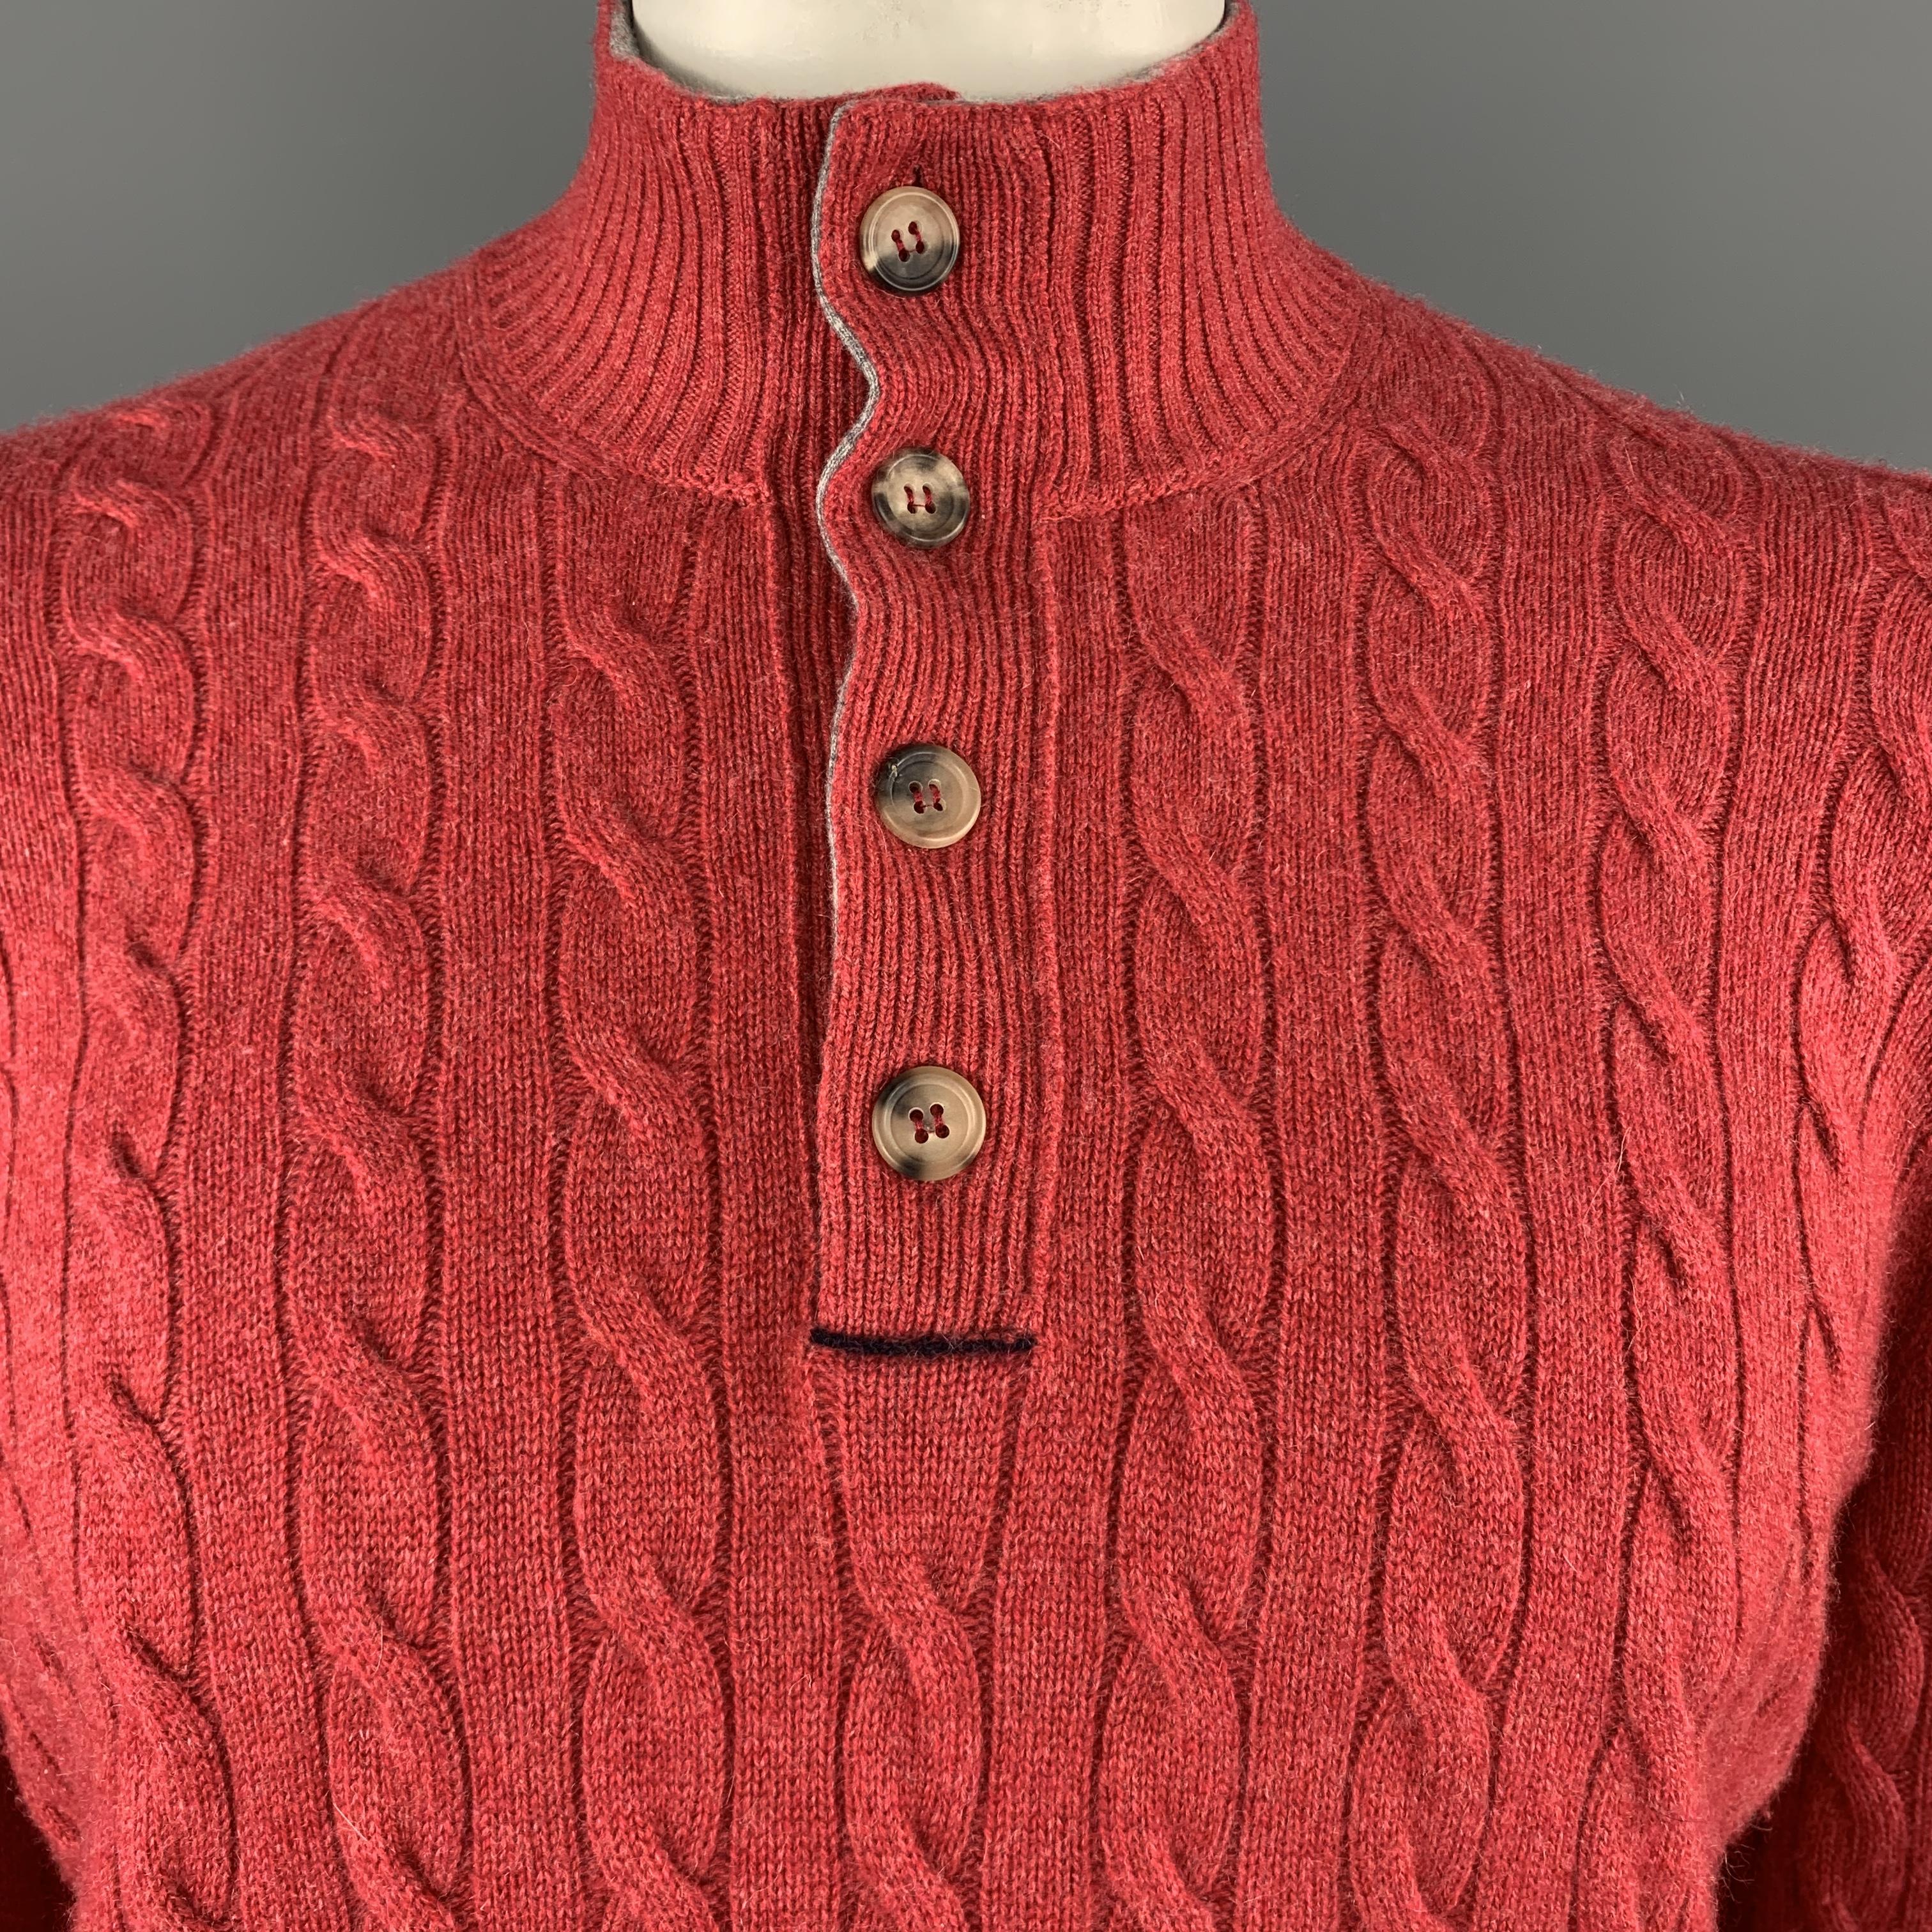 BRUNELLO CUCINELLI pullover sweater comes in muted red cashmere cable knit with a high ribbed mock neck collar and half button front. Made in Italy.

Excellent Pre-Owned Condition.
Marked: IT 52

Measurements:

Shoulder: 18 in.
Chest: 46 in.
Sleeve: